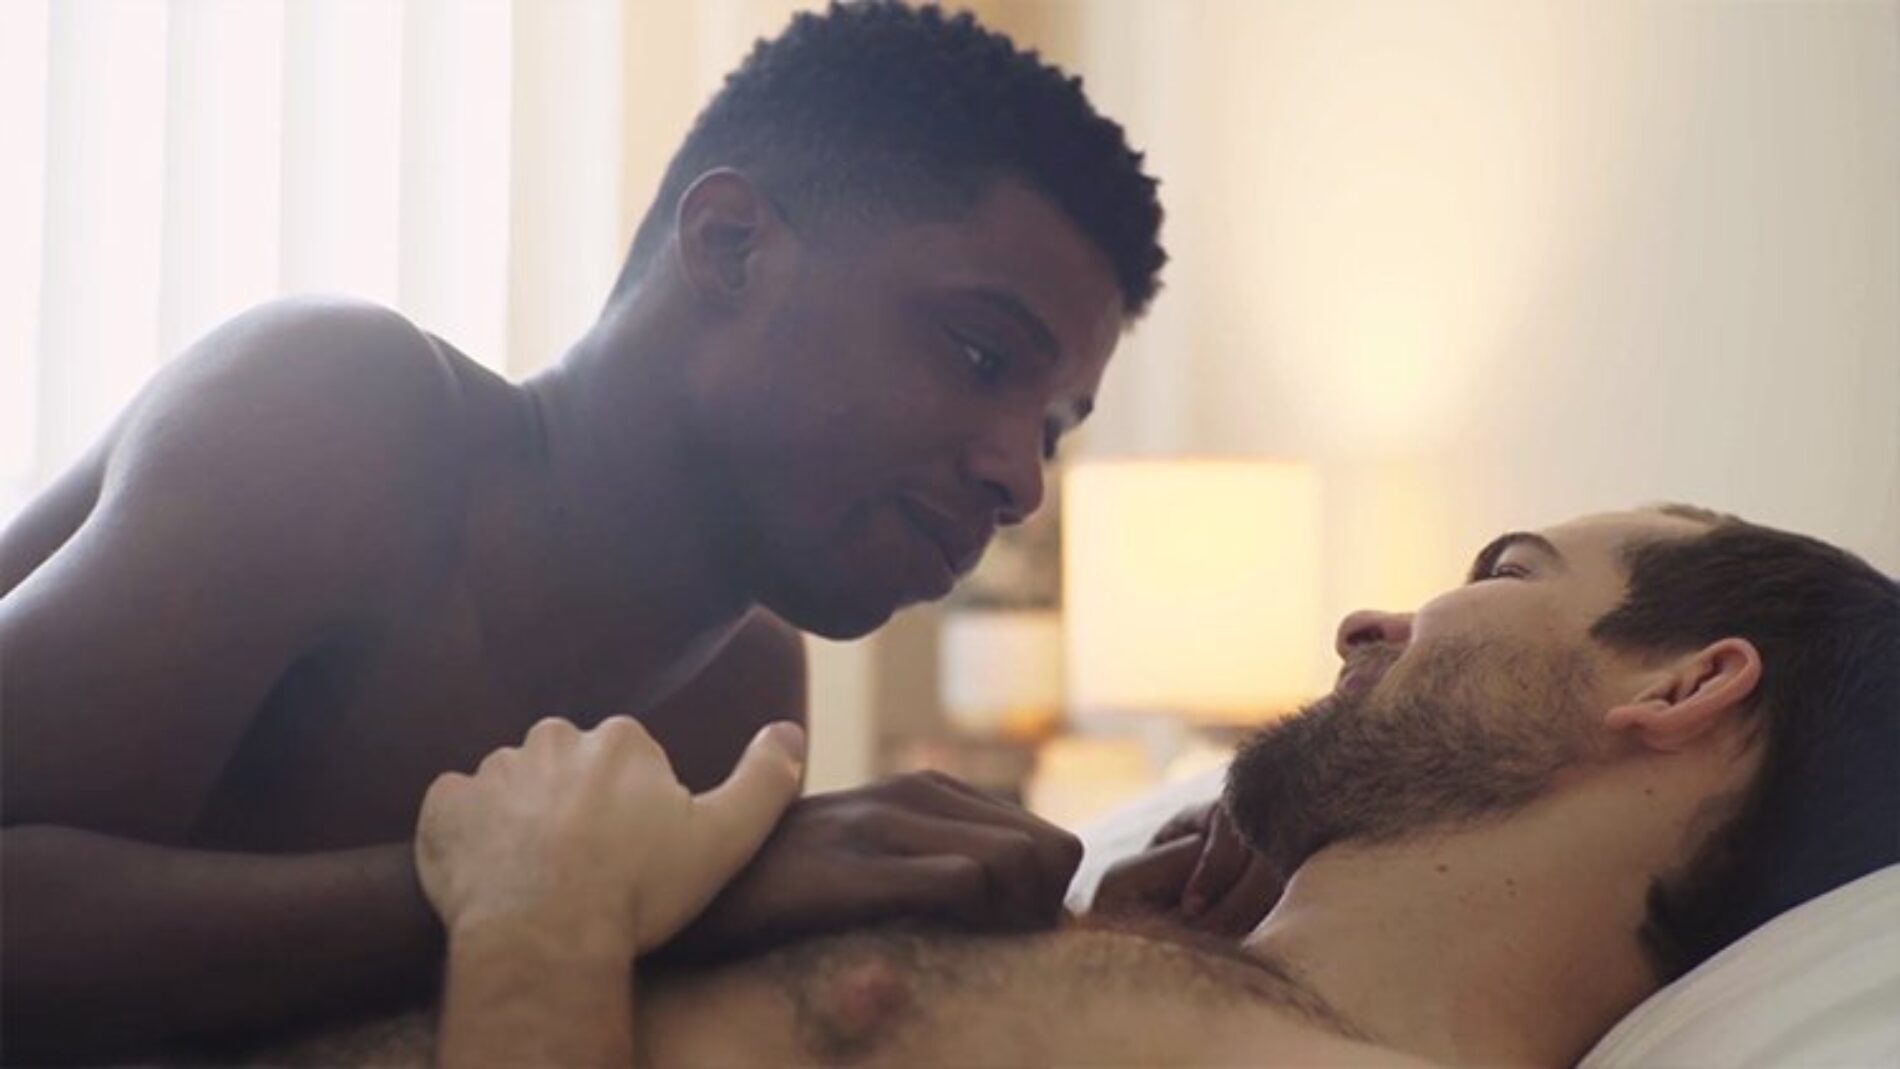 What Happens When A Bottom And A Vers-Bottom Fall In Love? Find Out In New Web Series, ‘The First’